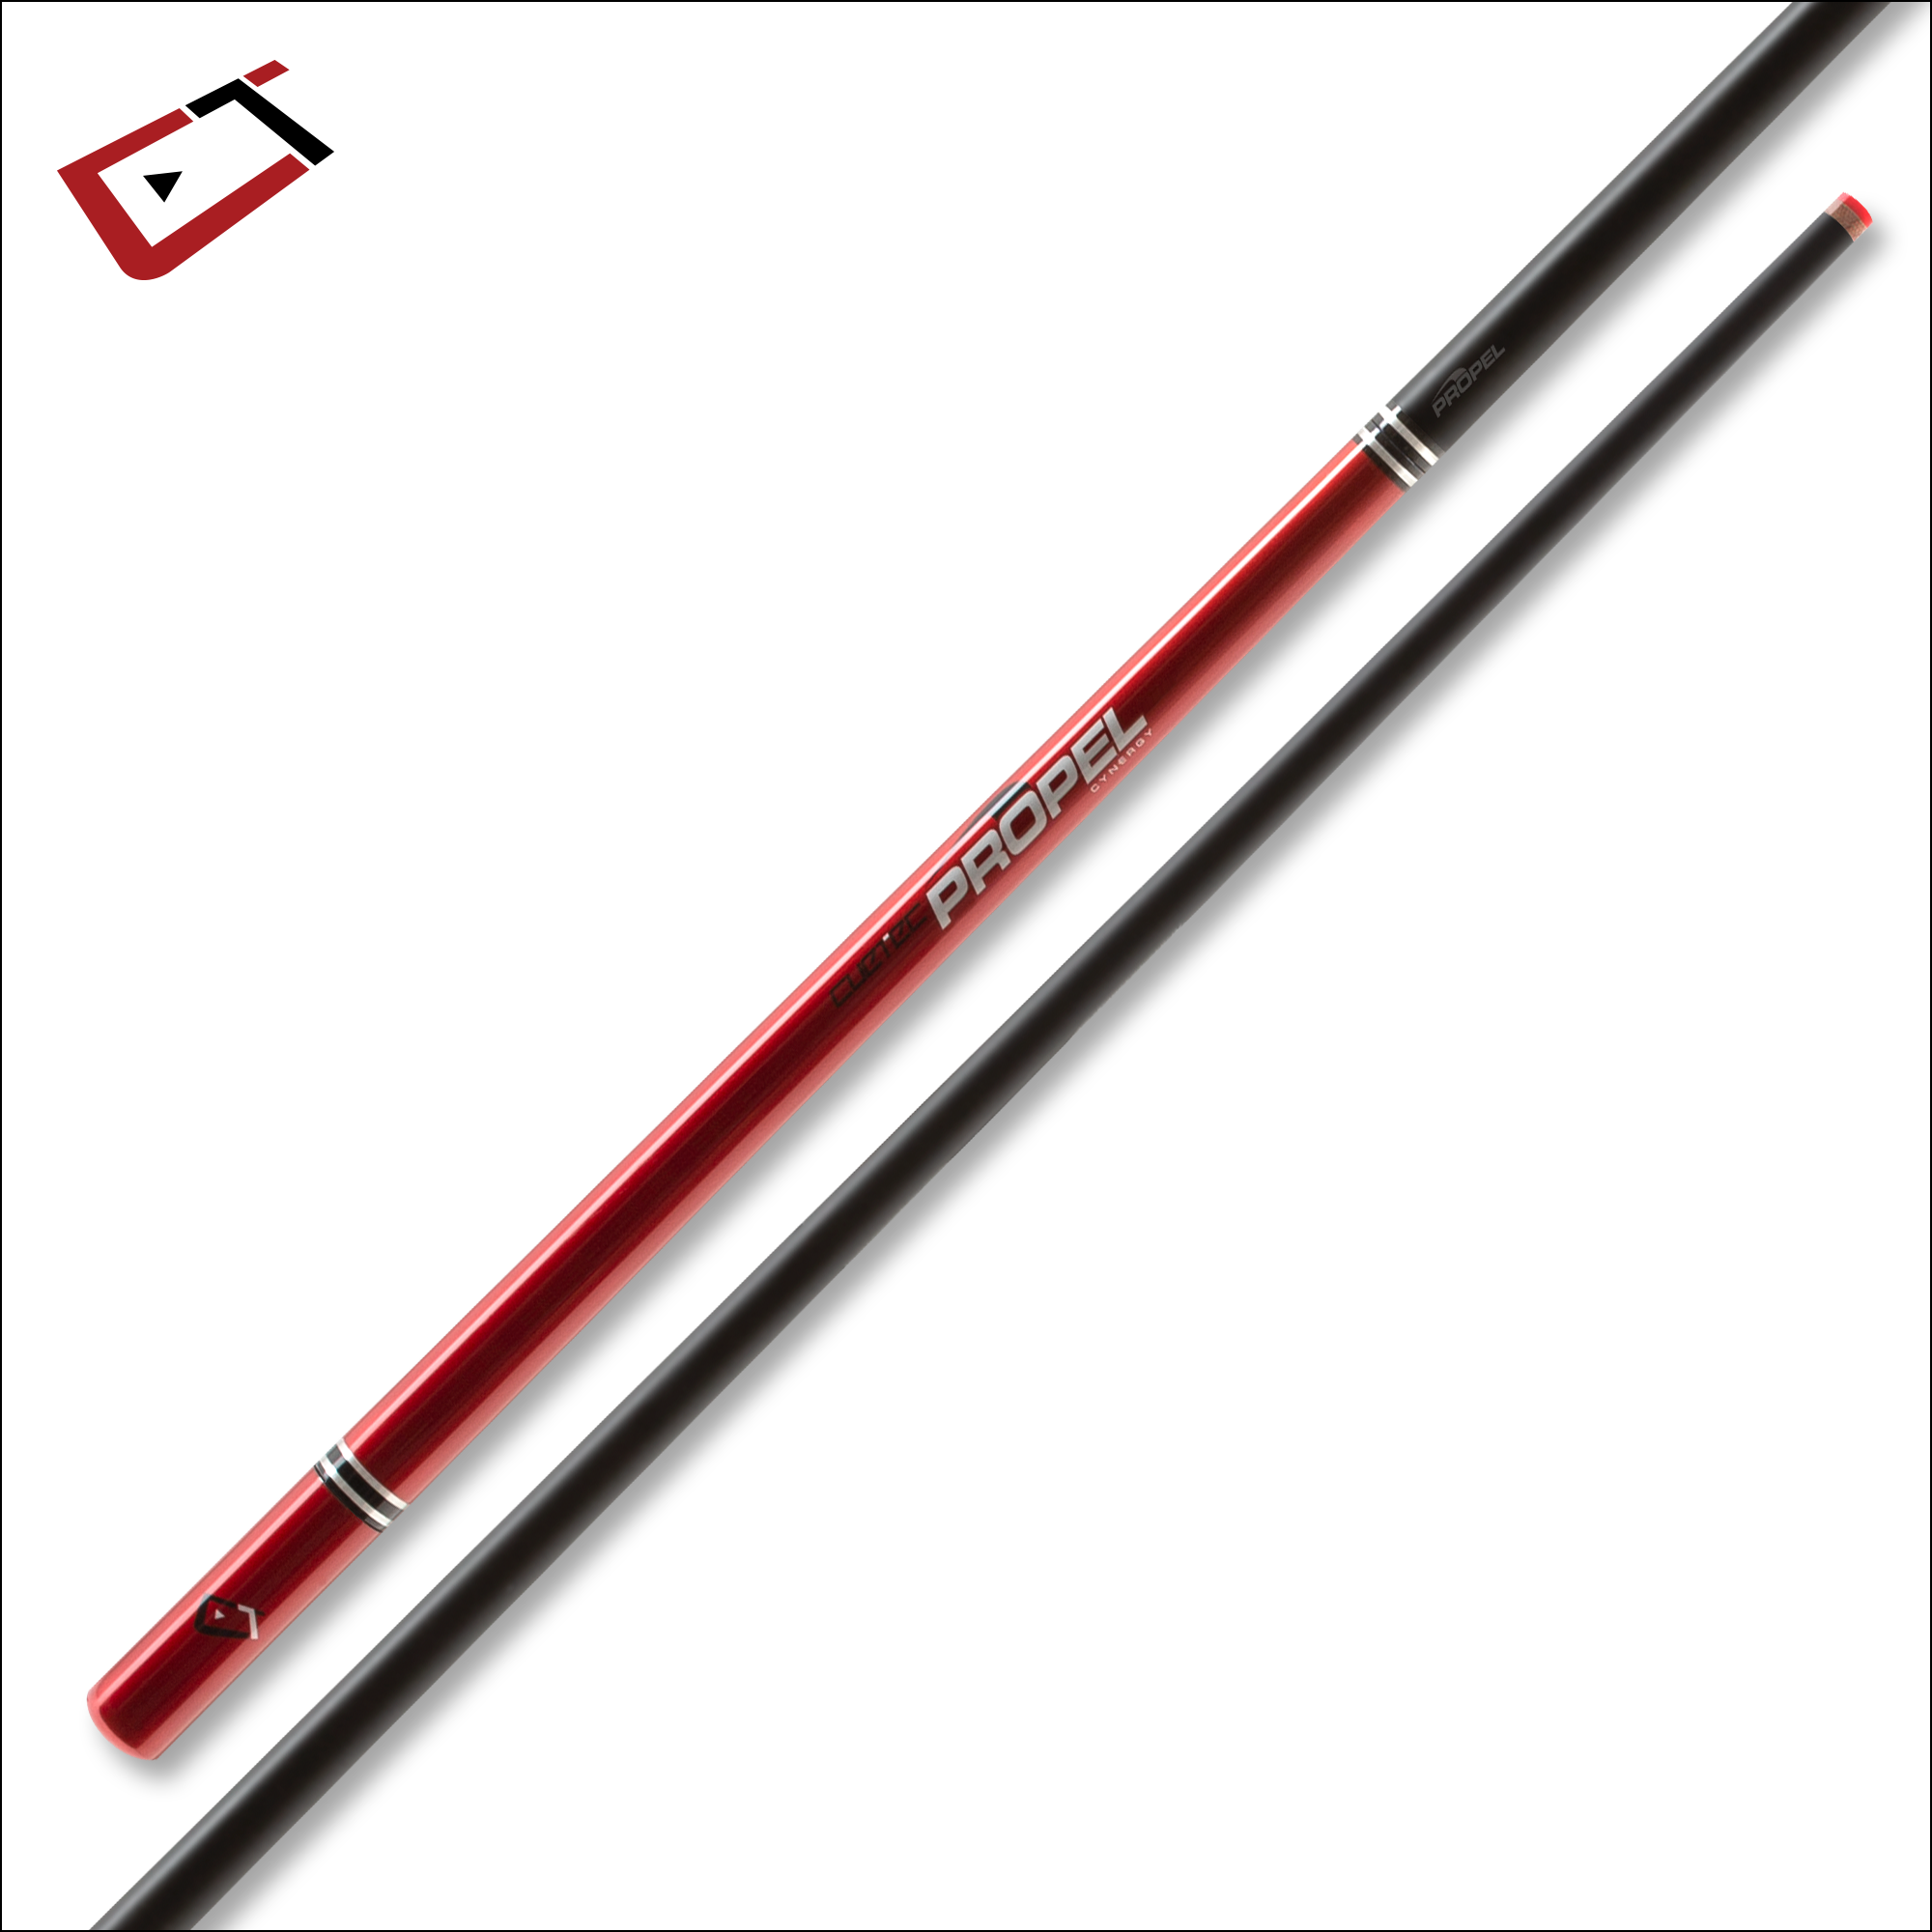 Propel Jump Cue Ruby Red